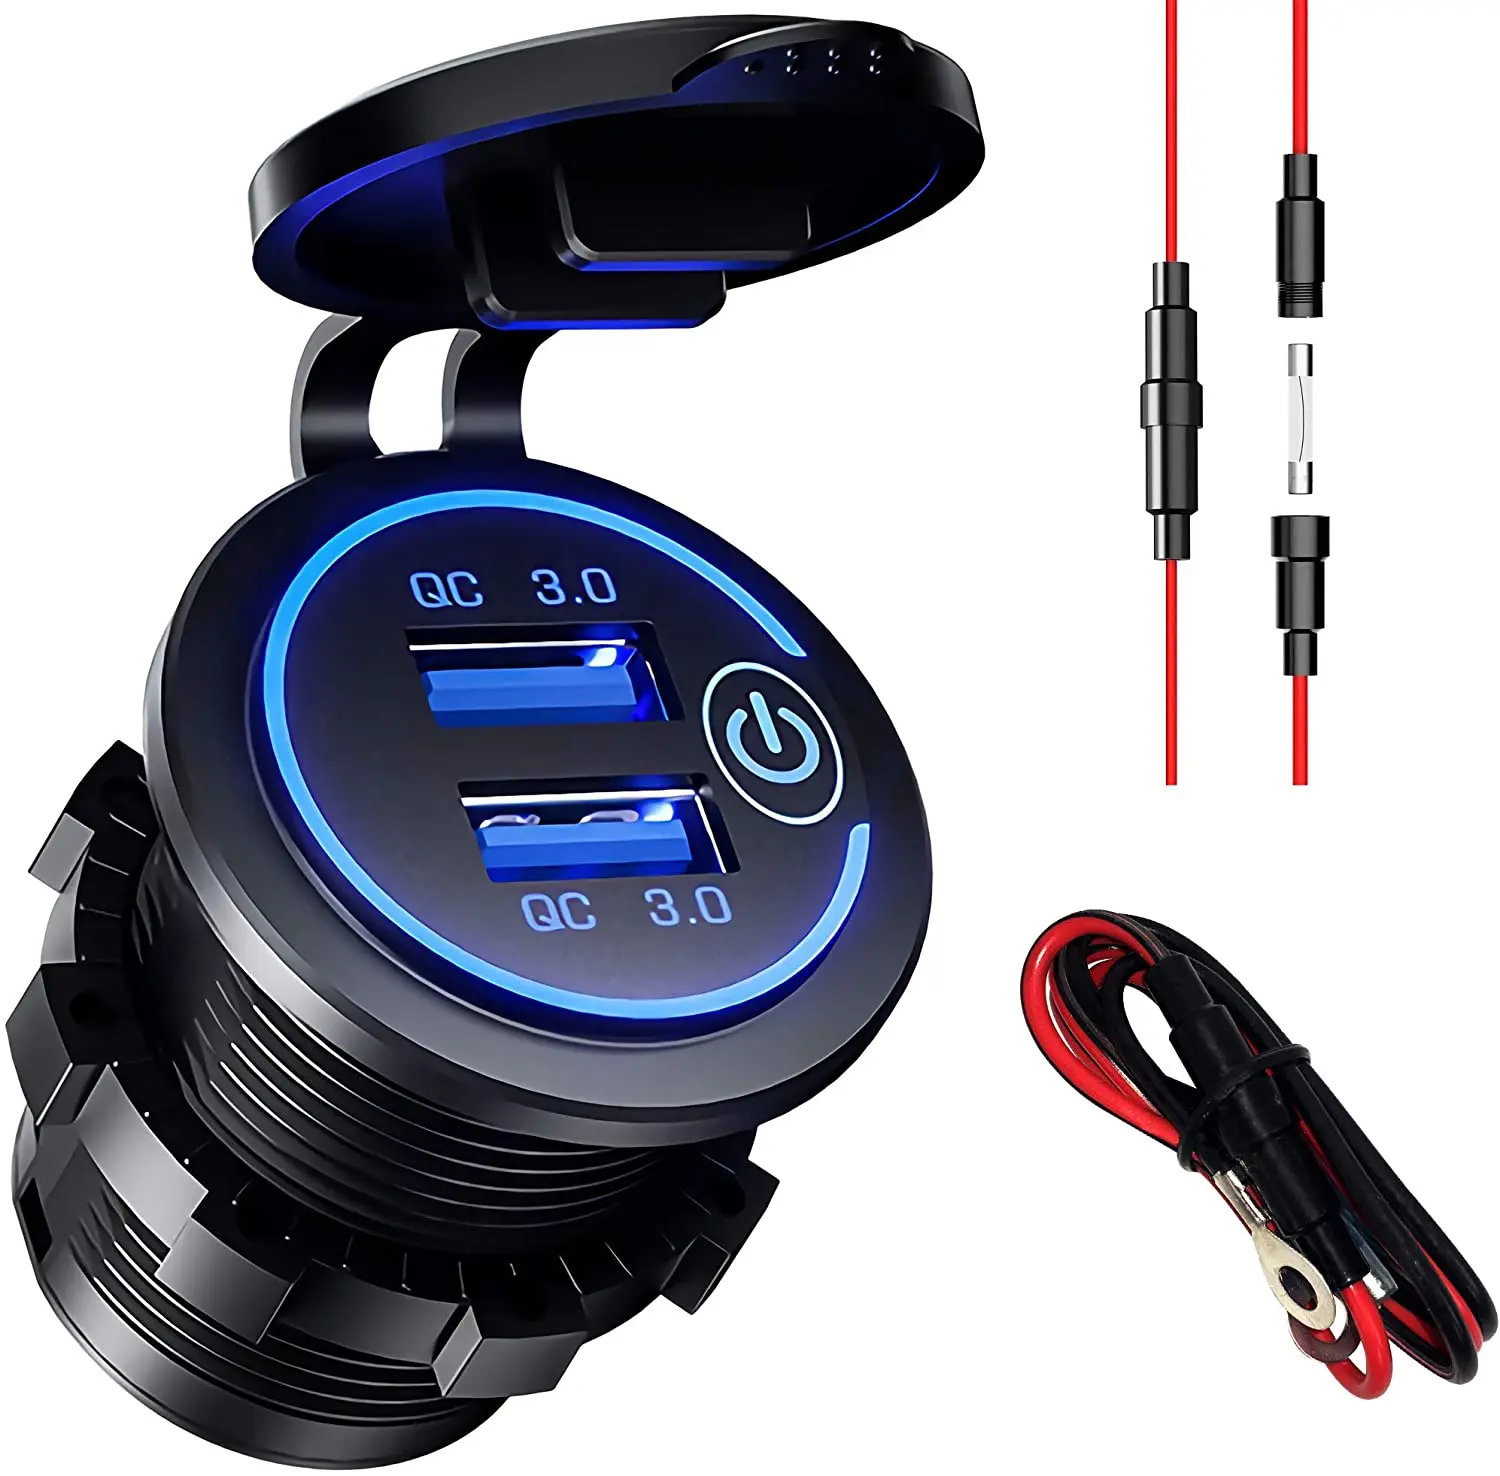 Waterproof 12V/24V QC3.0 Dual USB Fast Charger Socket Power Outlet with Touch Switch for Car Marine Truck and More Quick Charge 3.0 Dual USB Charger Socket Motorcycle Boat 